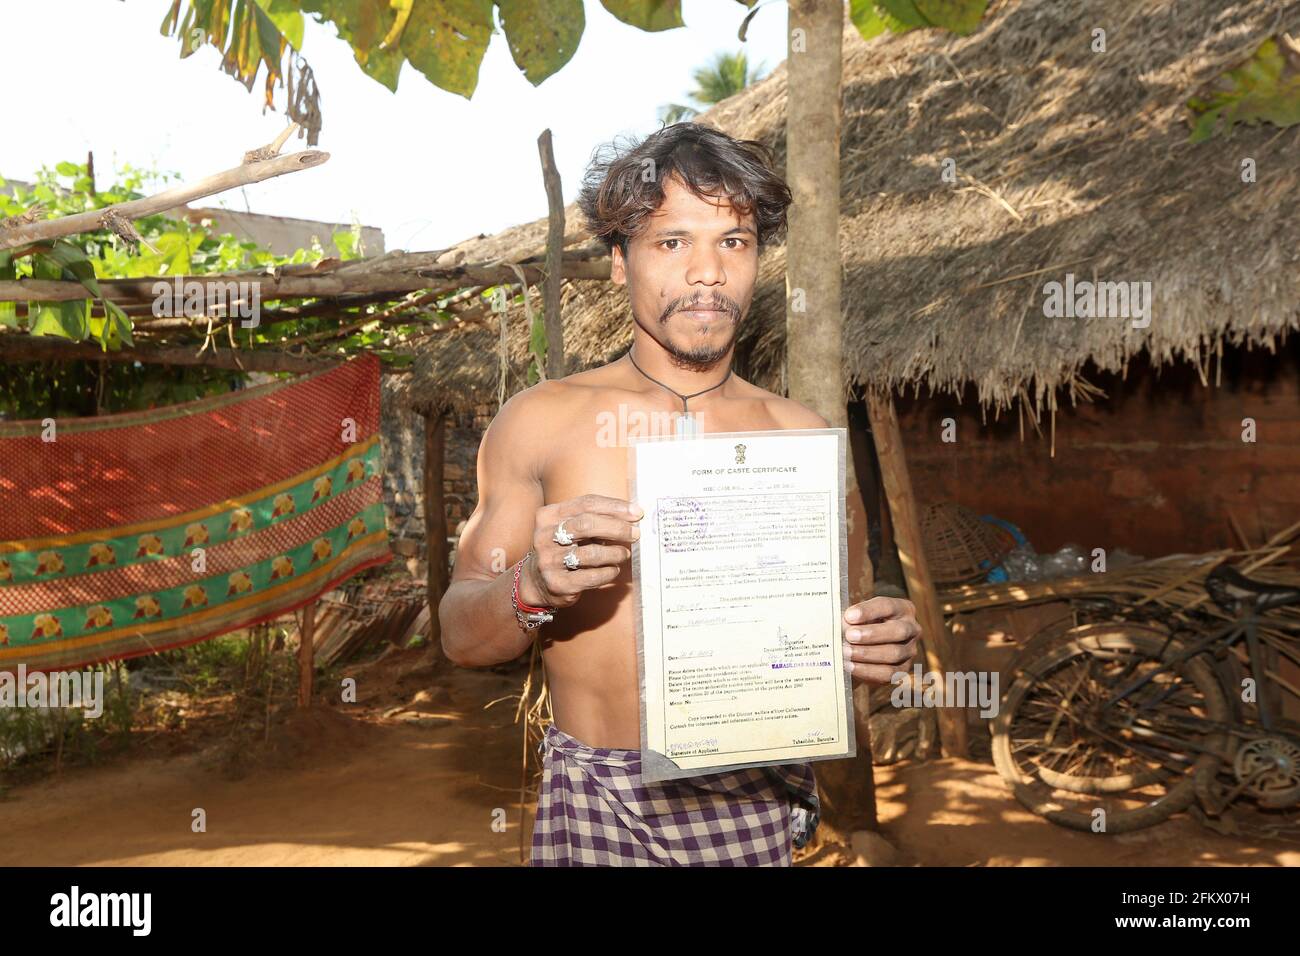 Young Farmer showing his caste certificate at Kuanarpal village of Cuttack district of Odisha, India Stock Photo